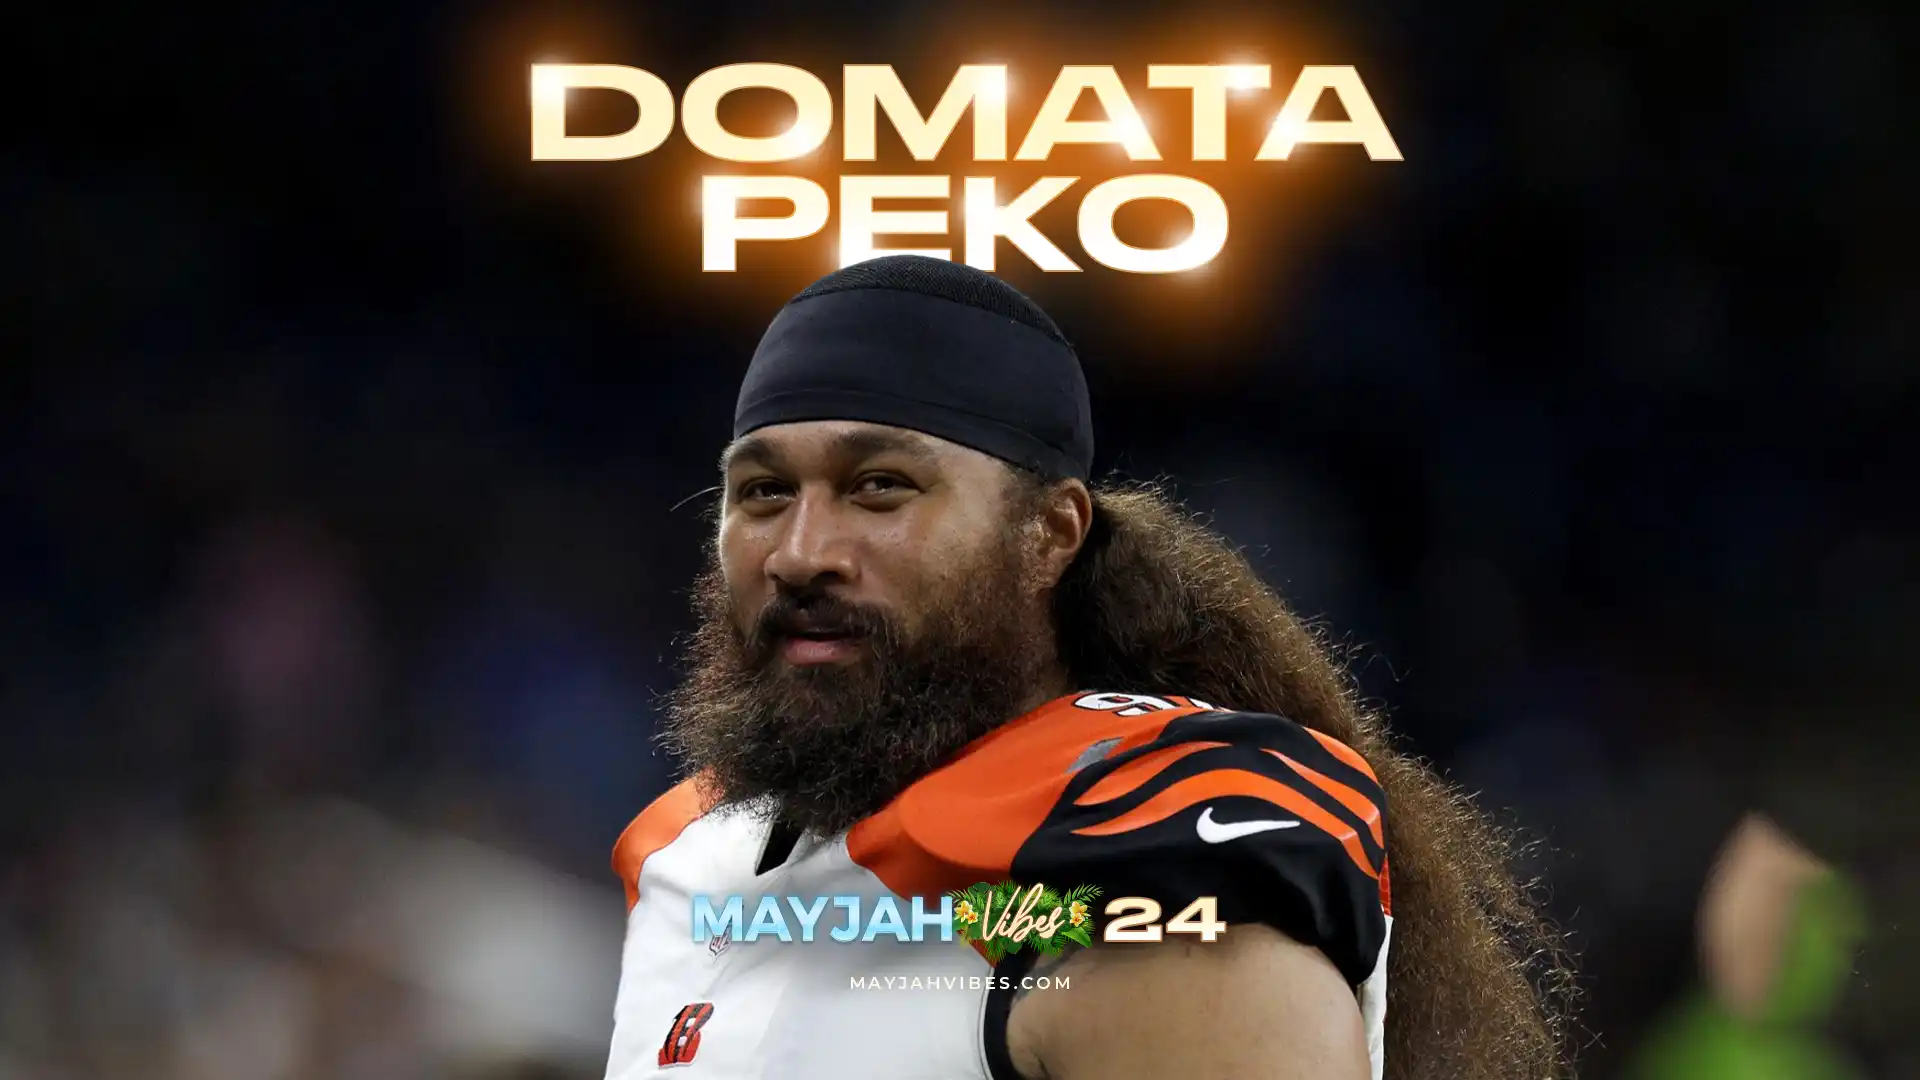 Domata Peko retired NFL player, is to be presented a Lifetime Achievement Award during Mayjah Vibes 2024